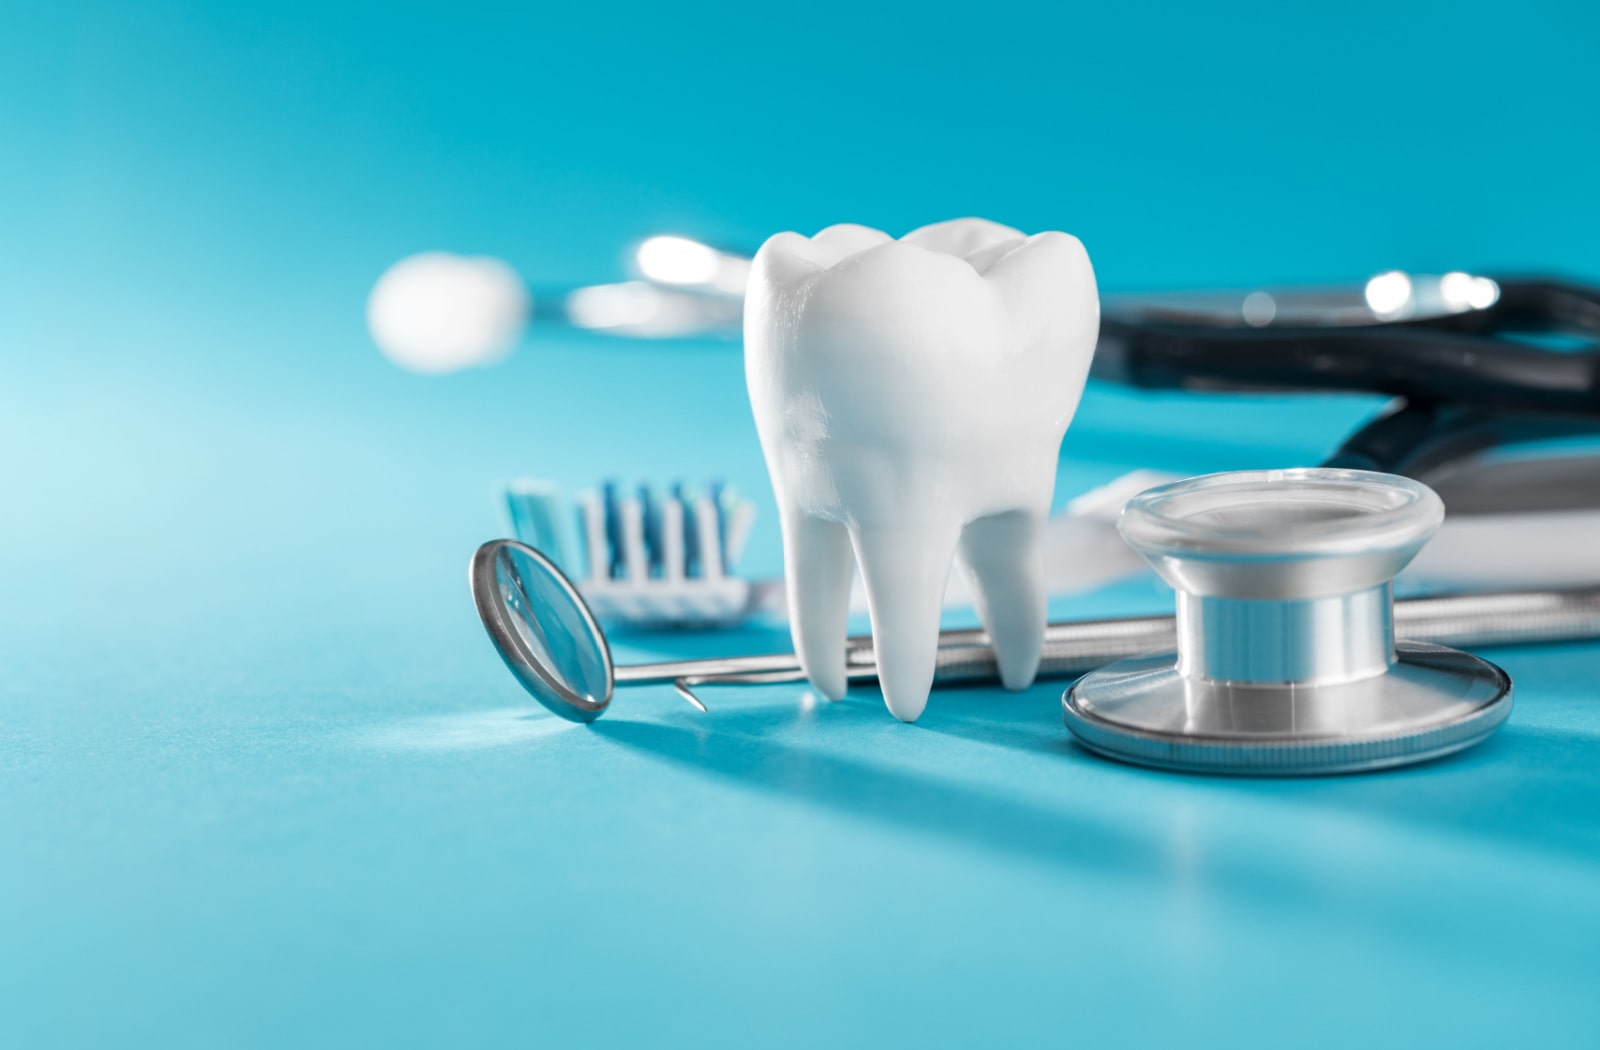 A plastic model of a tooth sitting next to a small dental mirror, a toothbrush, and a stethoscope